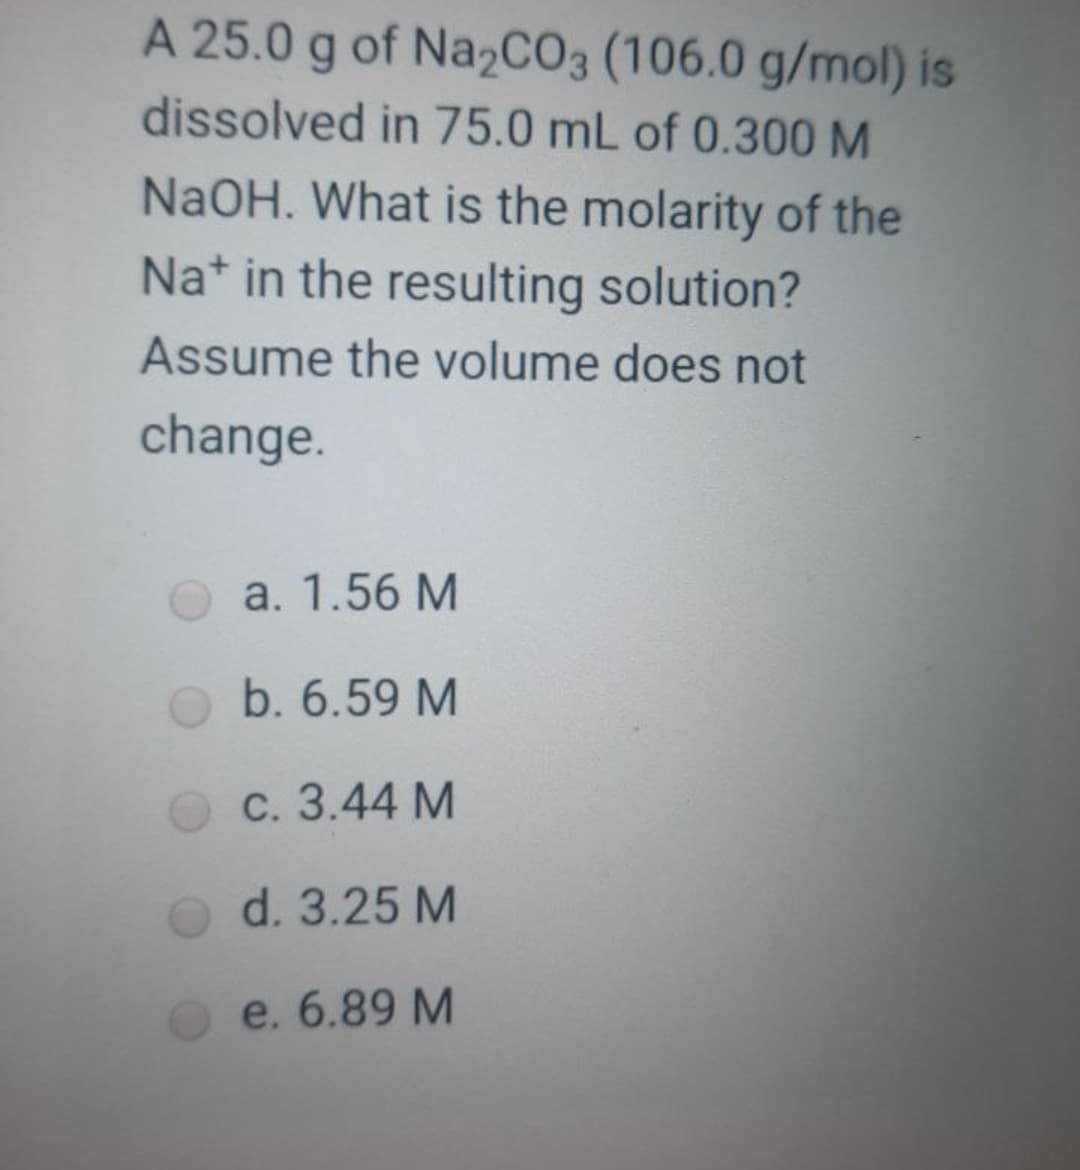 A 25.0 g of Na2CO3 (106.0 g/mol) is
dissolved in 75.0 mL of 0.300 M
NaOH. What is the molarity of the
Na* in the resulting solution?
Assume the volume does not
change.
a. 1.56 M
b. 6.59 M
C. 3.44 M
d. 3.25 M
e. 6.89 M
